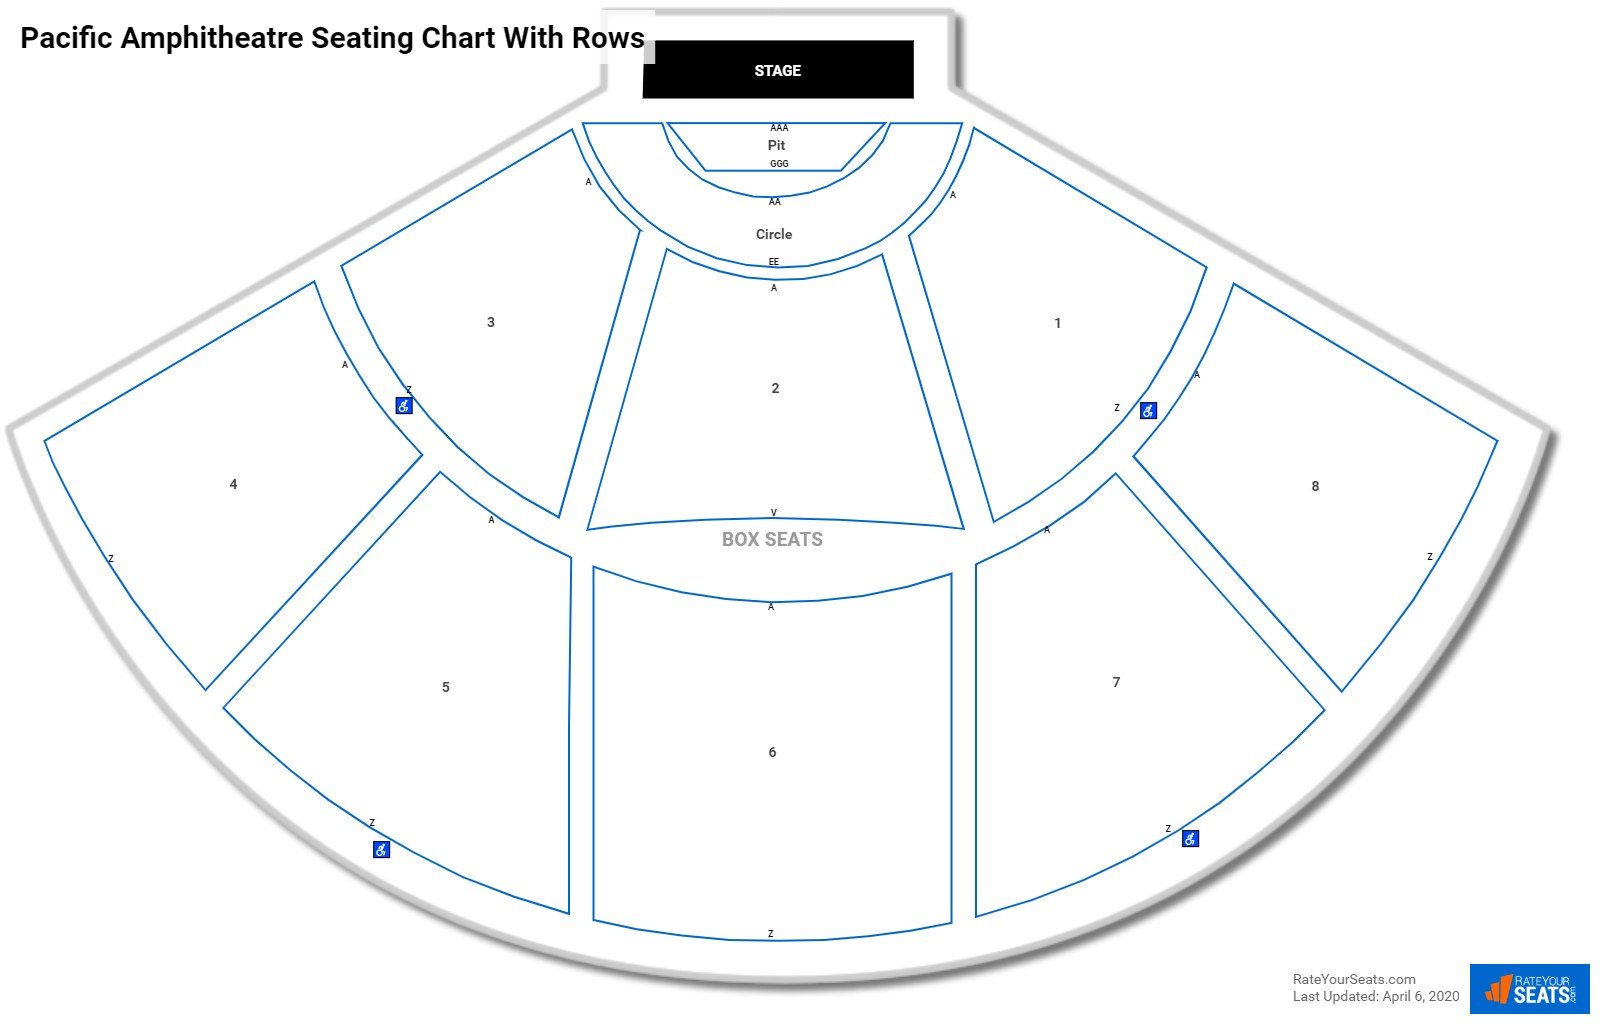 Pacific Amphitheatre seating chart with row numbers